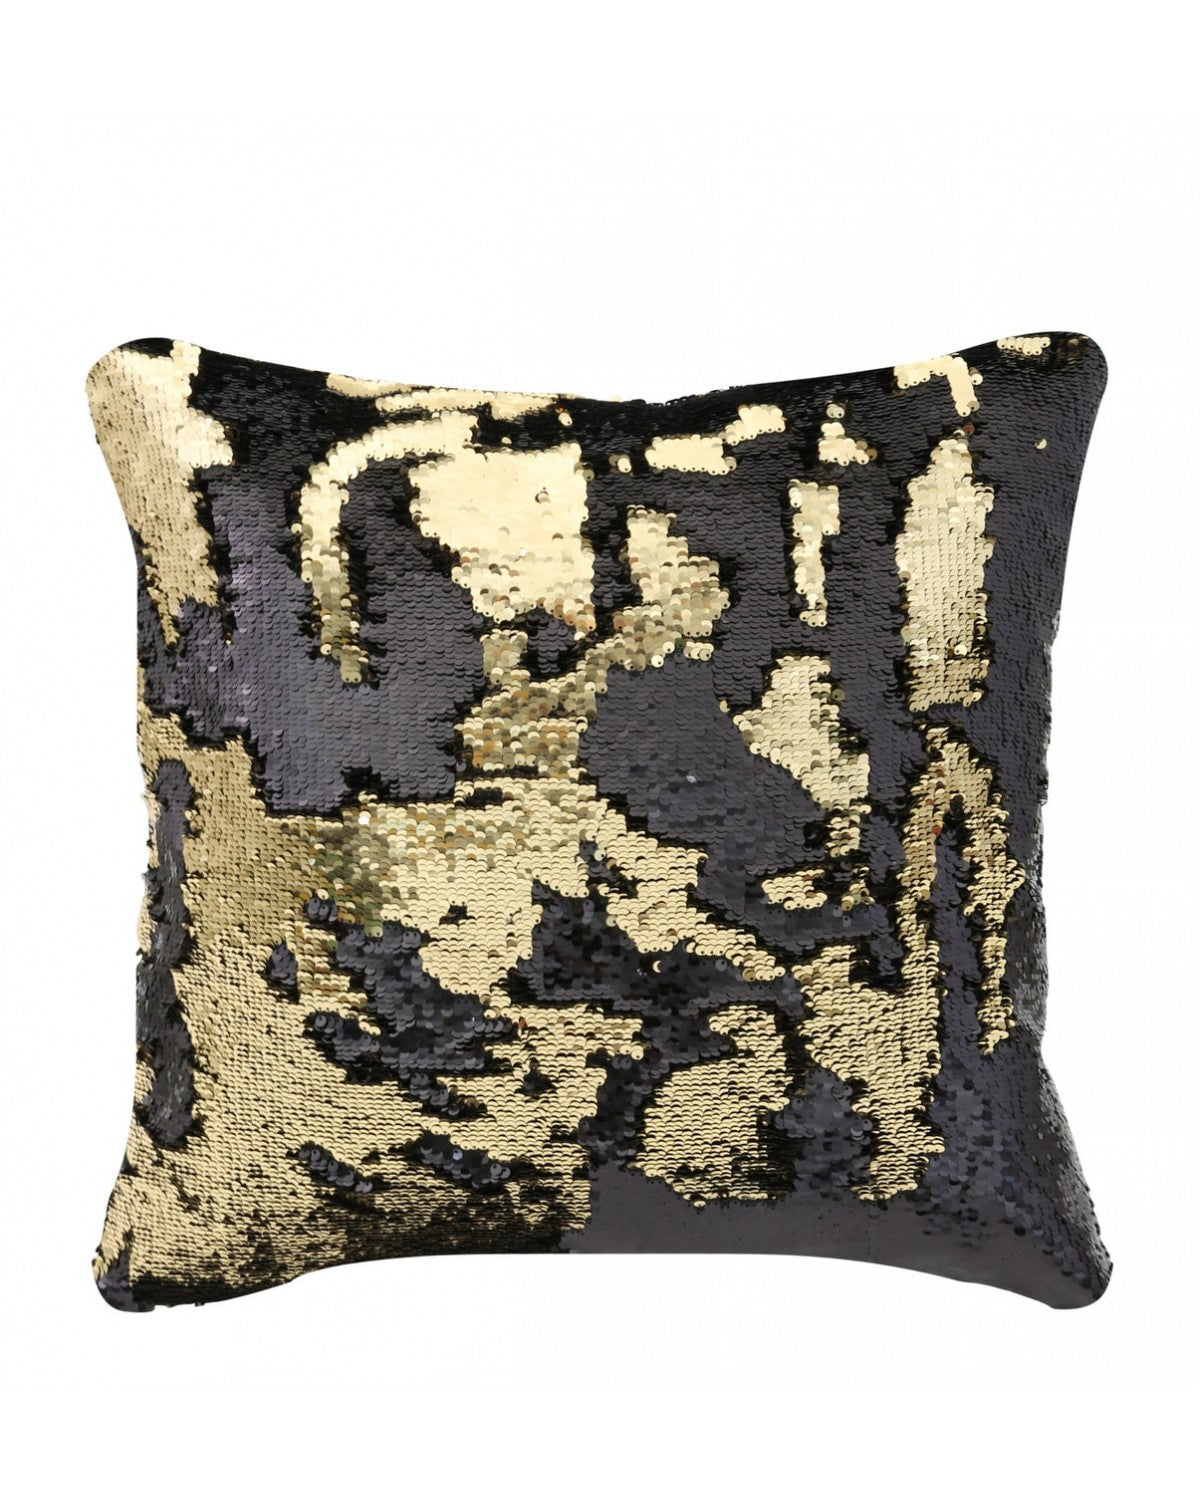 Deco Home Black And White Mermaid Sequin Cushion Large Gold